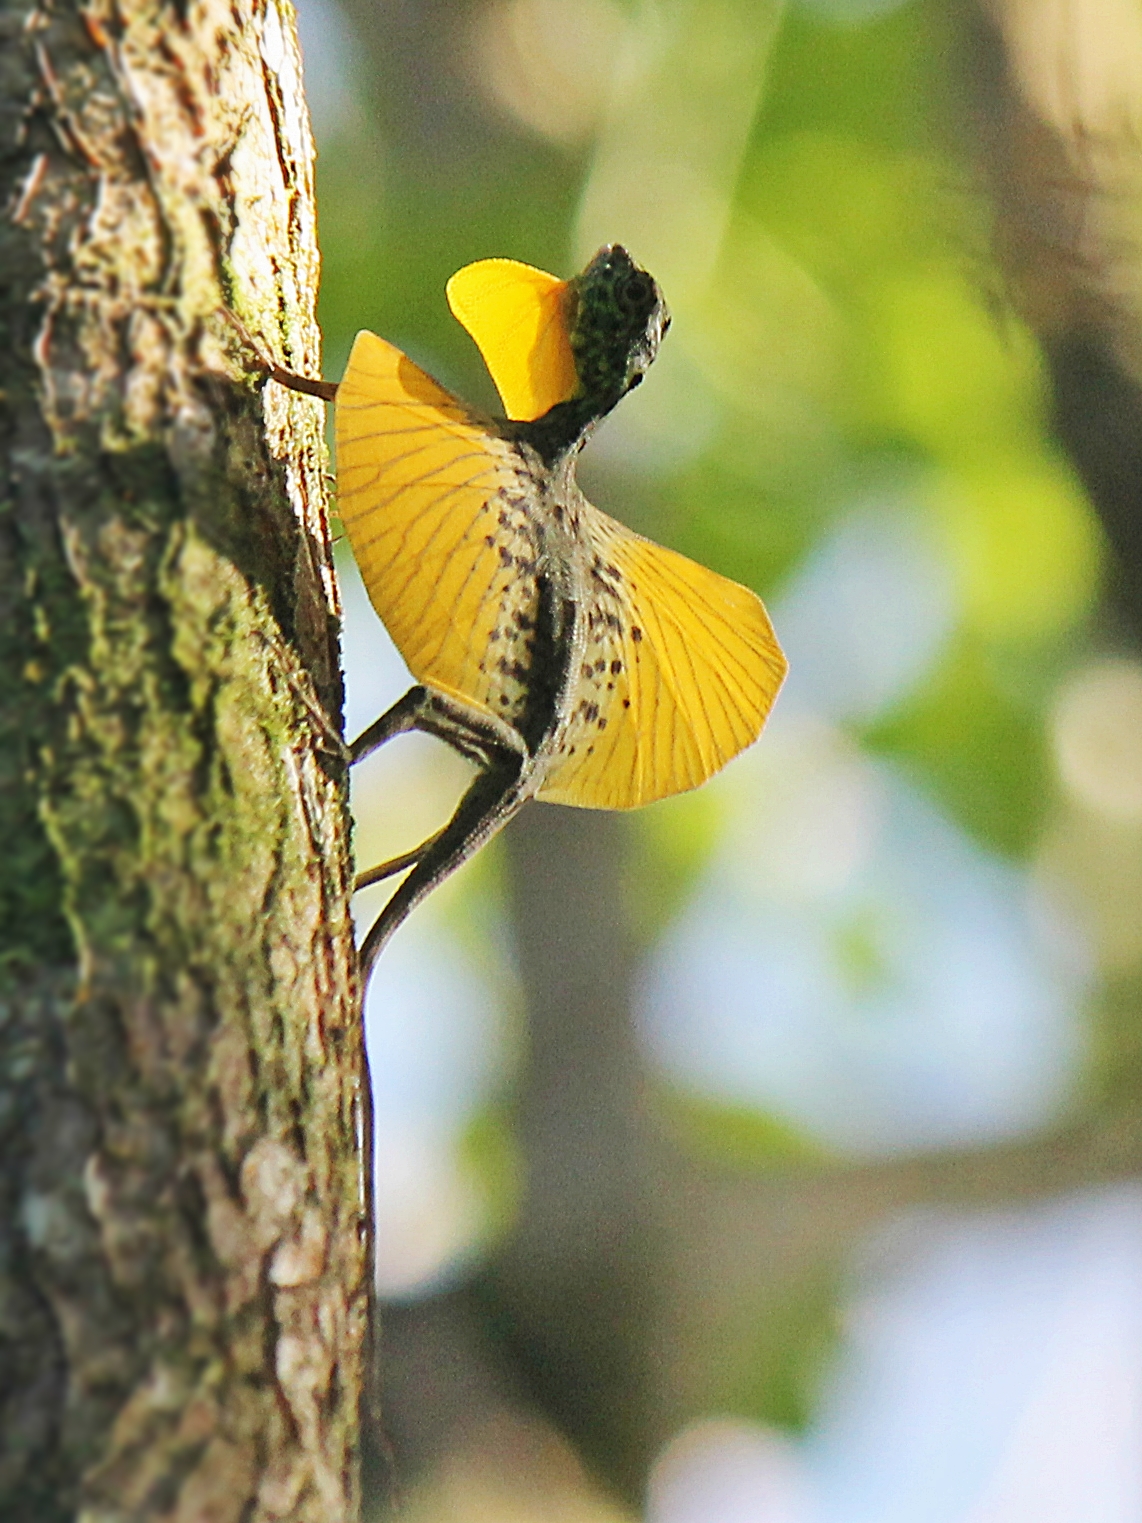 Book a thailand holiday with Kenwood travel and see a flying draco lizard